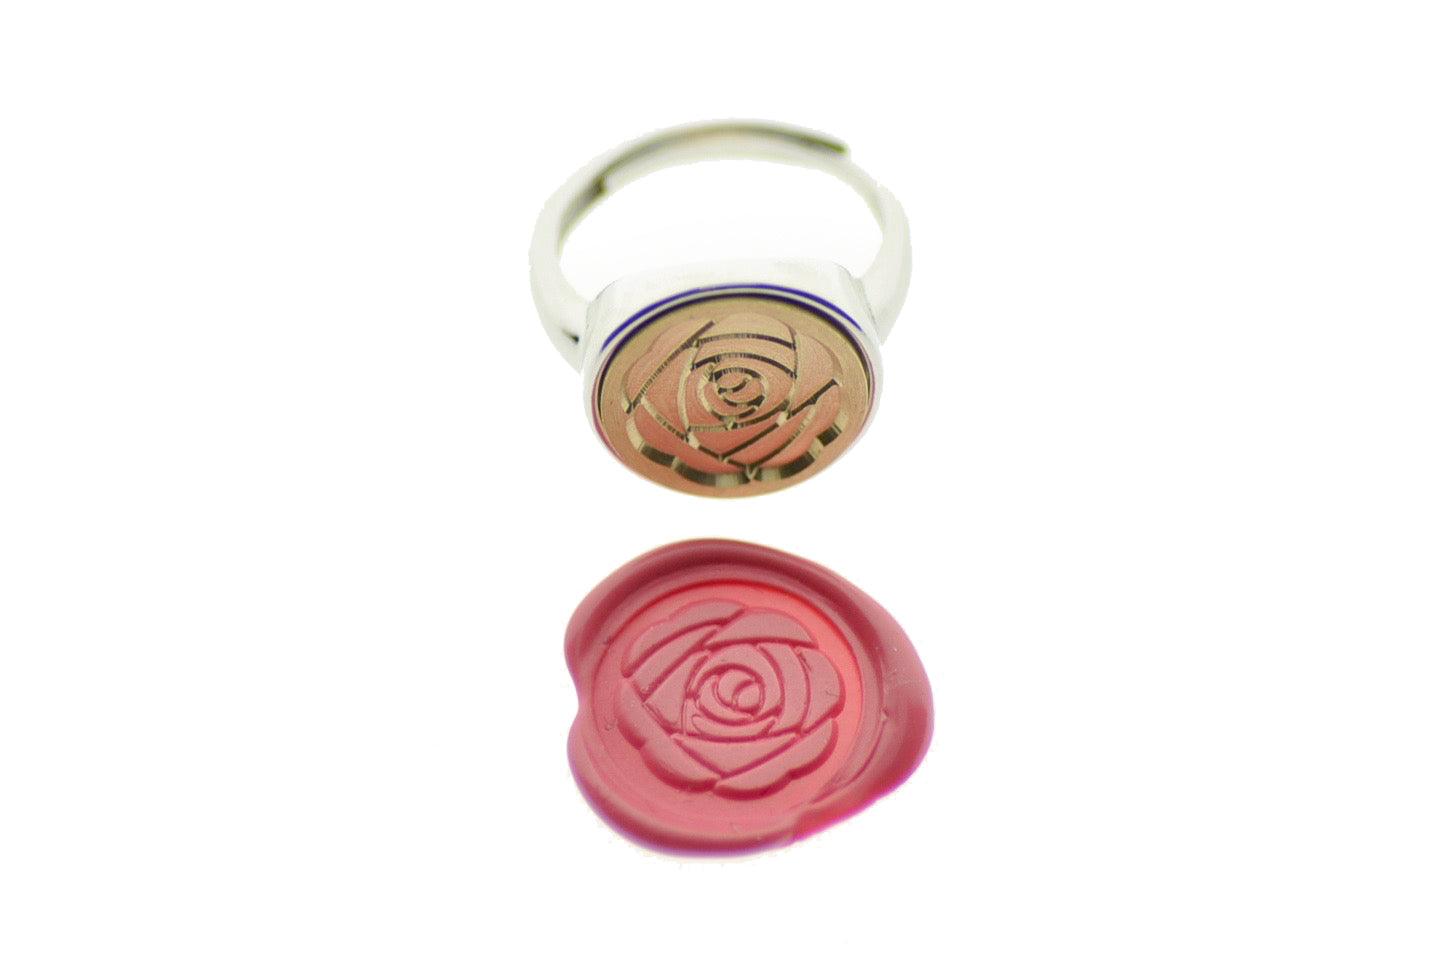 Peony Signet Ring - Backtozero B20 - 14m, 14mm, 14mm ring, 14mn, accessory, Botanical, floral, Flower, her, jewelry, minimal, Nature, peony, Plant, ring, signet ring, simple, size 10, size 7, size 8, size 9, wax seal, wax seal stamp